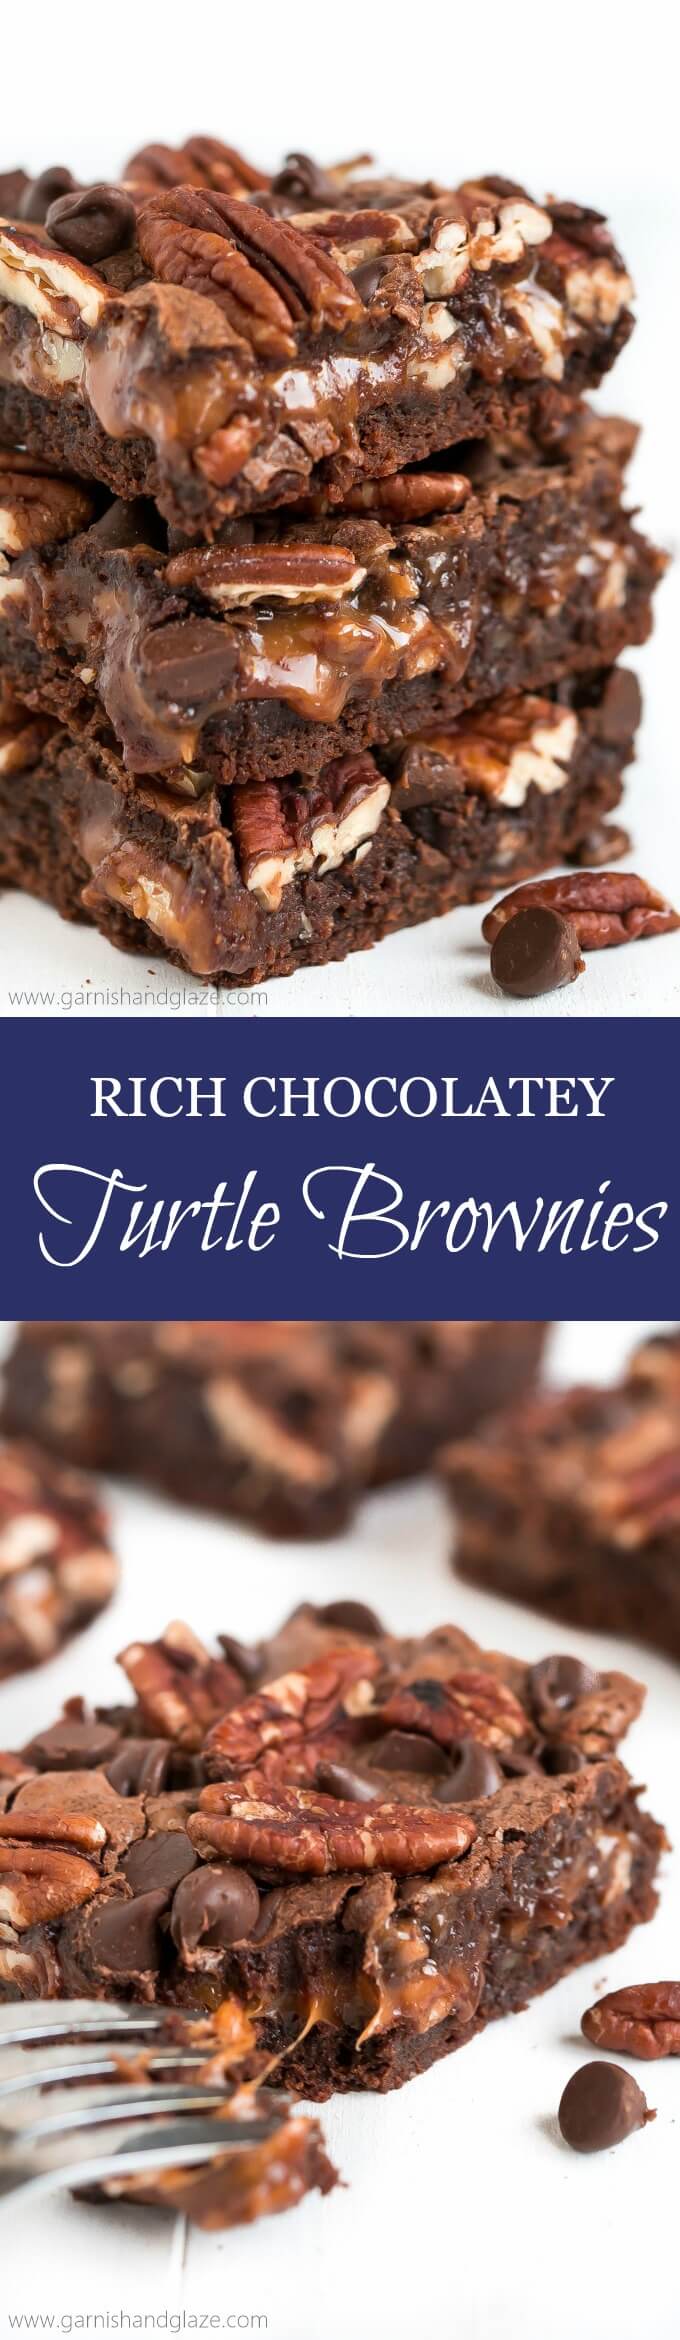 Rich chocolatey brownies filled with sweet gooey caramel and crunchy pecans... these delicious Turtle Brownies are going to blow your mind!